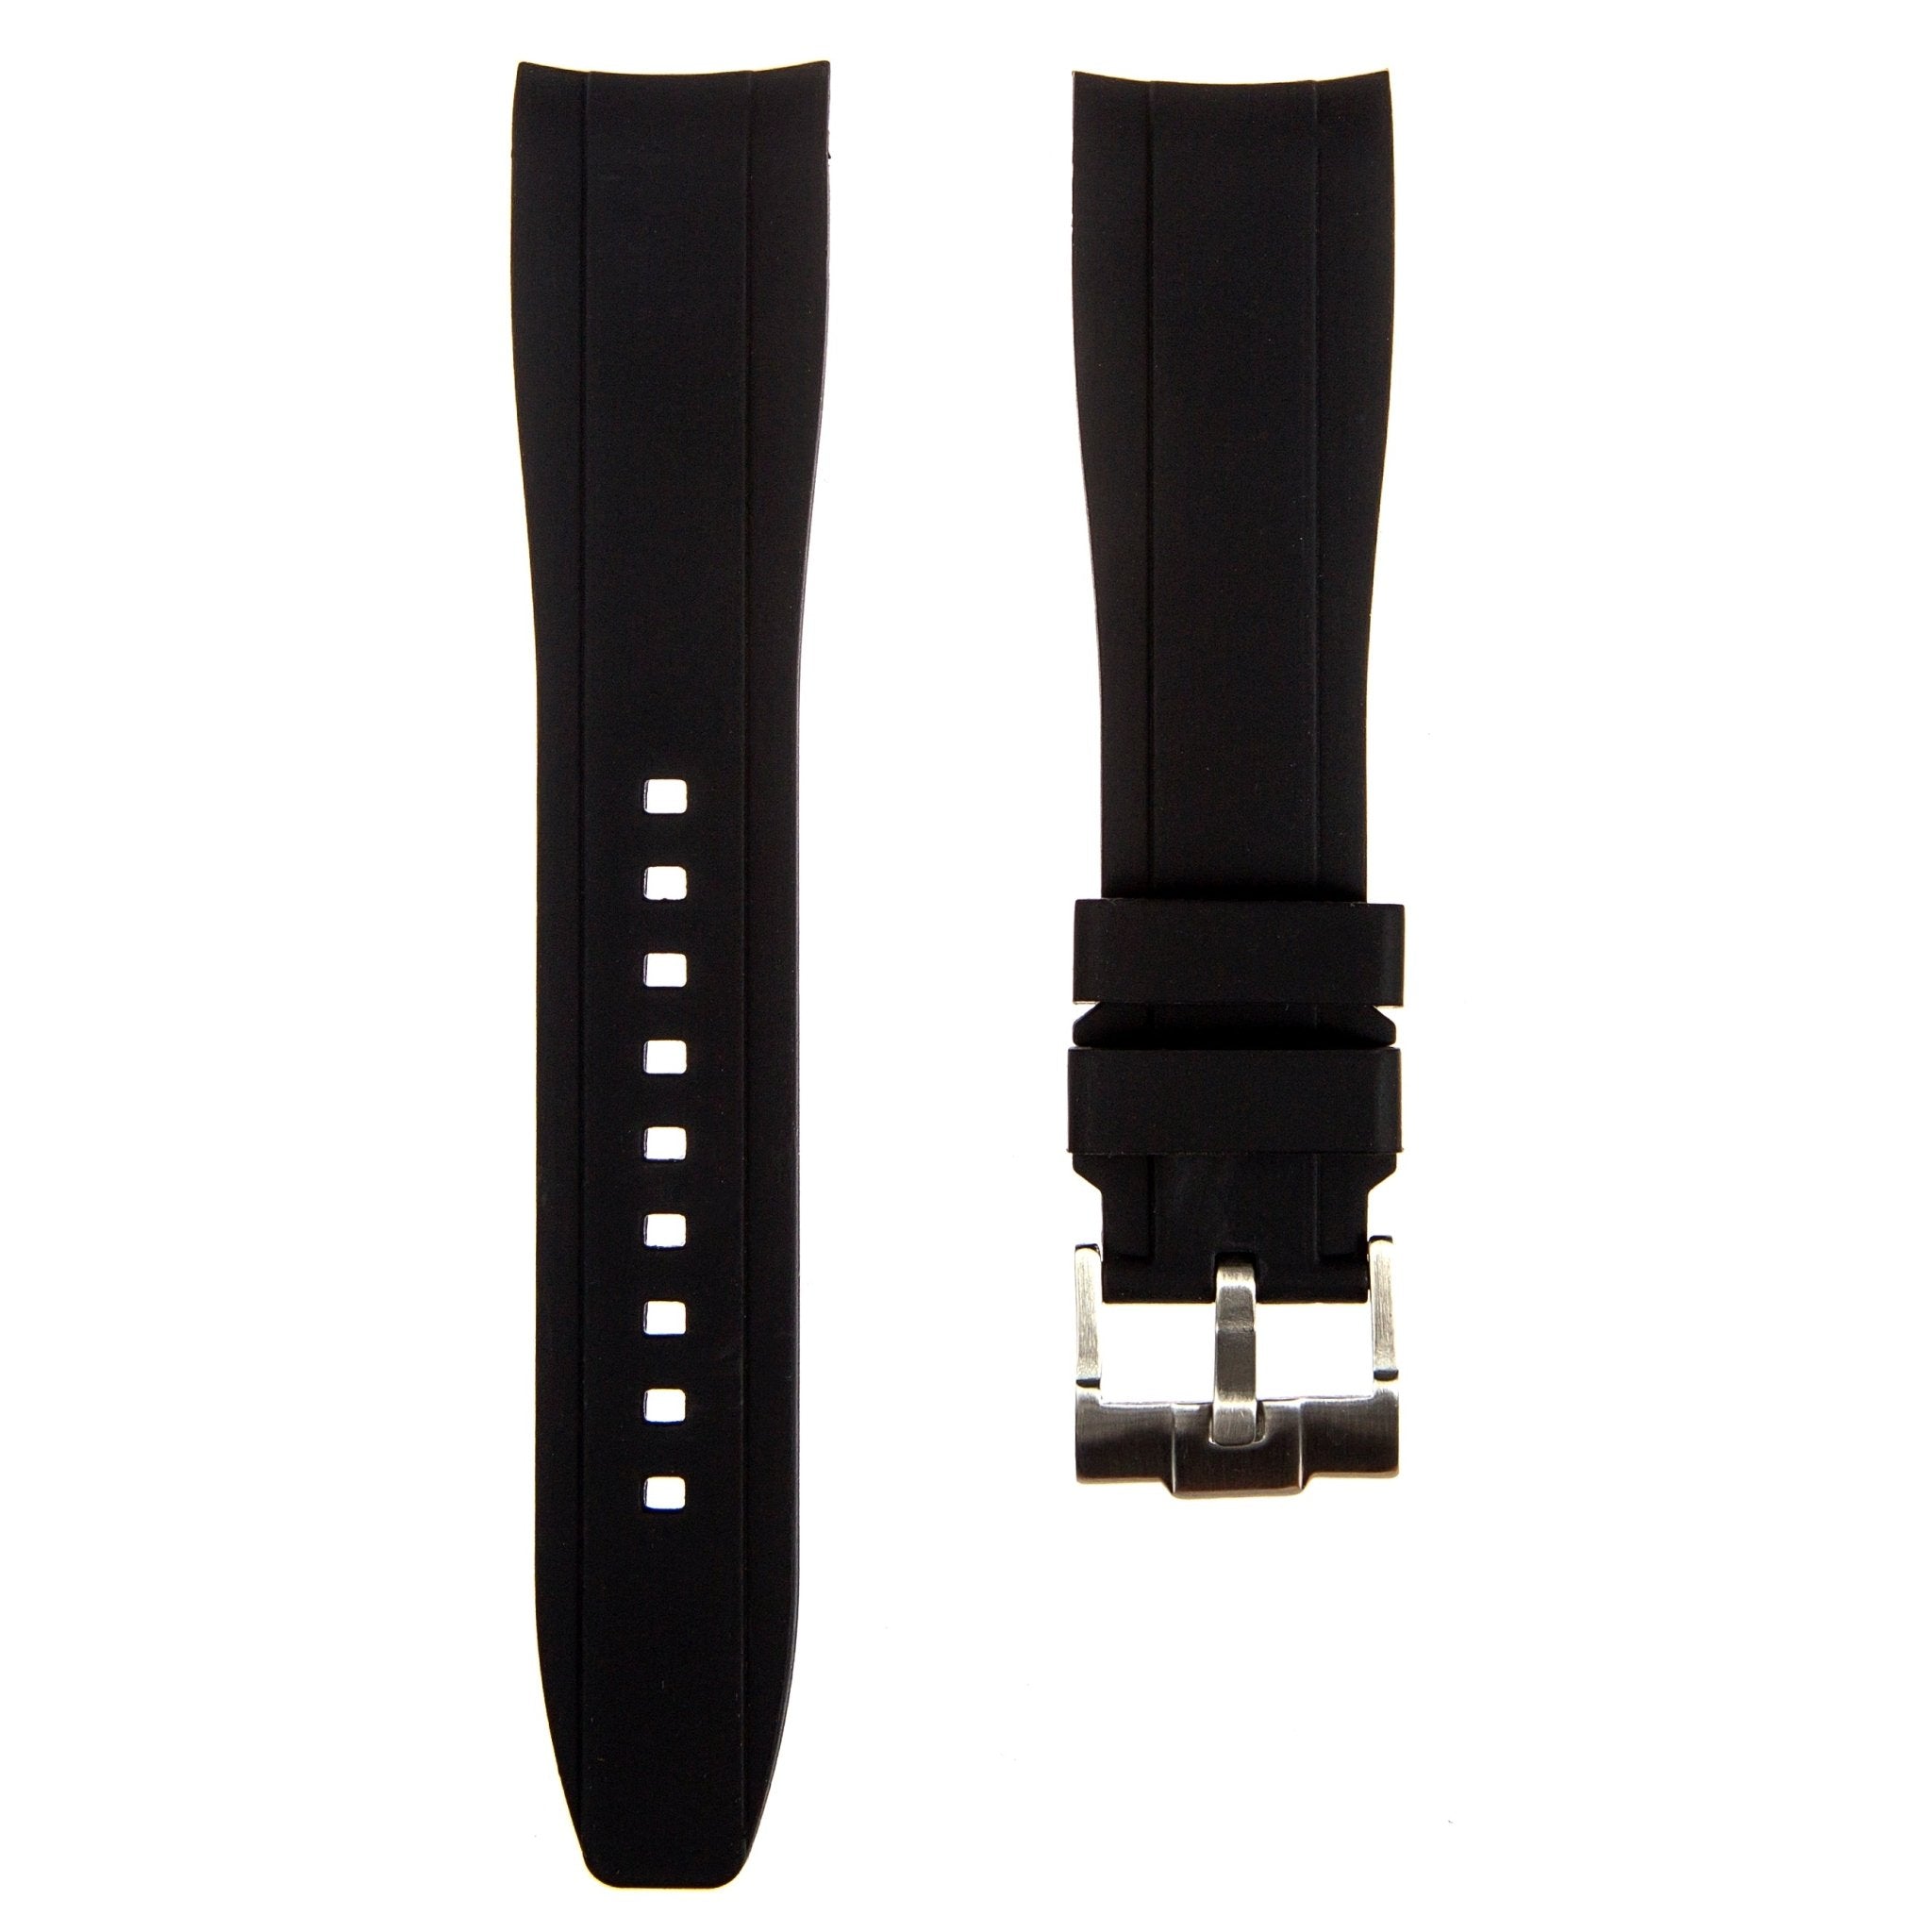 Curved End Soft Silicone Strap - Compatible with Rolex Submariner - Black (2418) -StrapSeeker